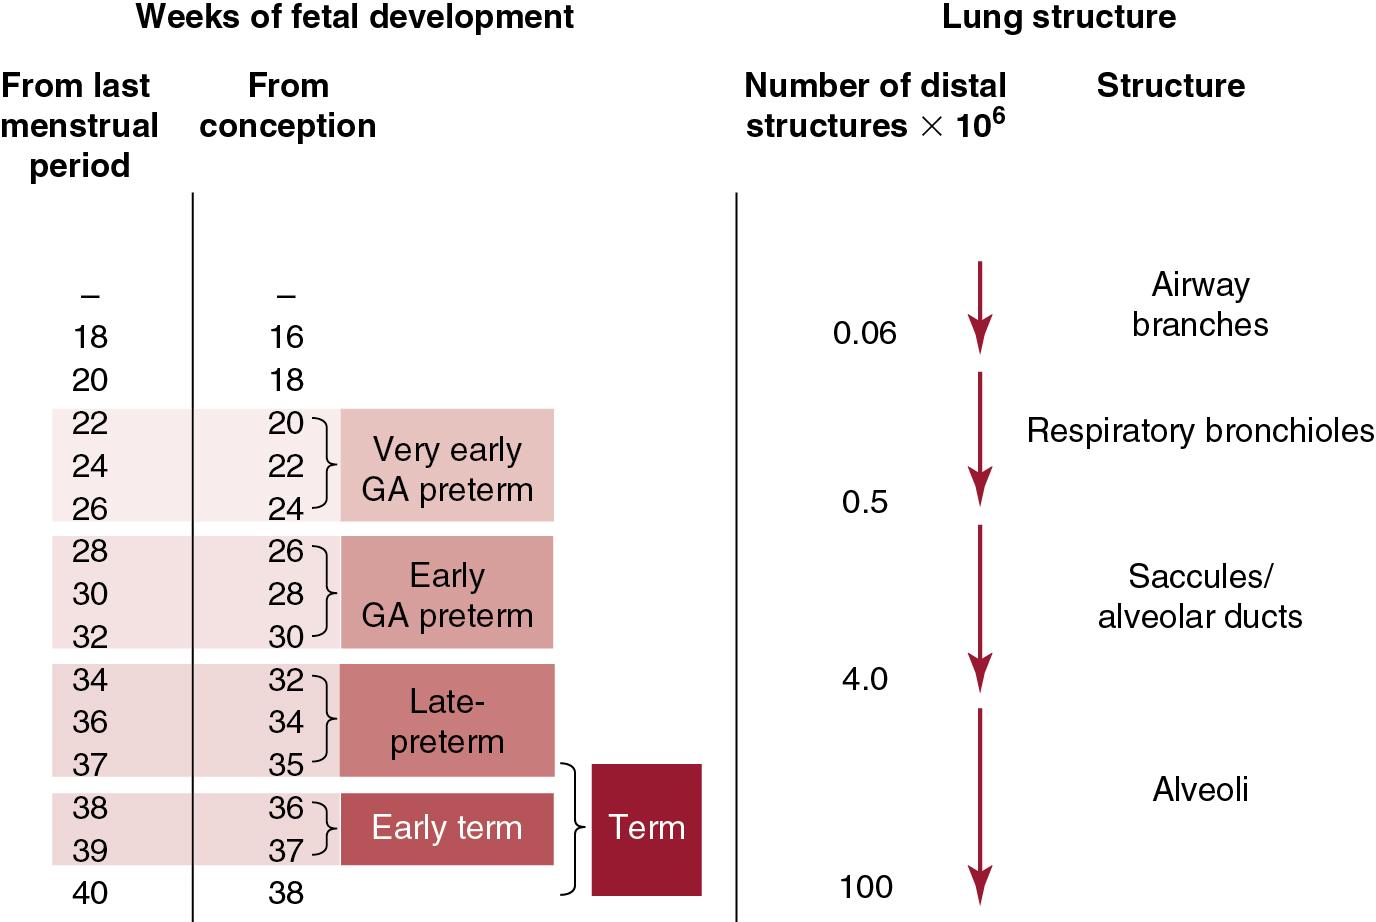 Fig. 1.2, Timing of fetal lung development, emphasizing the 2-week difference in weeks between postmenstrual age and conceptional age. The lung progressively branches from airways to alveoli with a large increase in distal structures. The adult lung contains about 500 × 10 6 alveoli. GA , Gestational age.